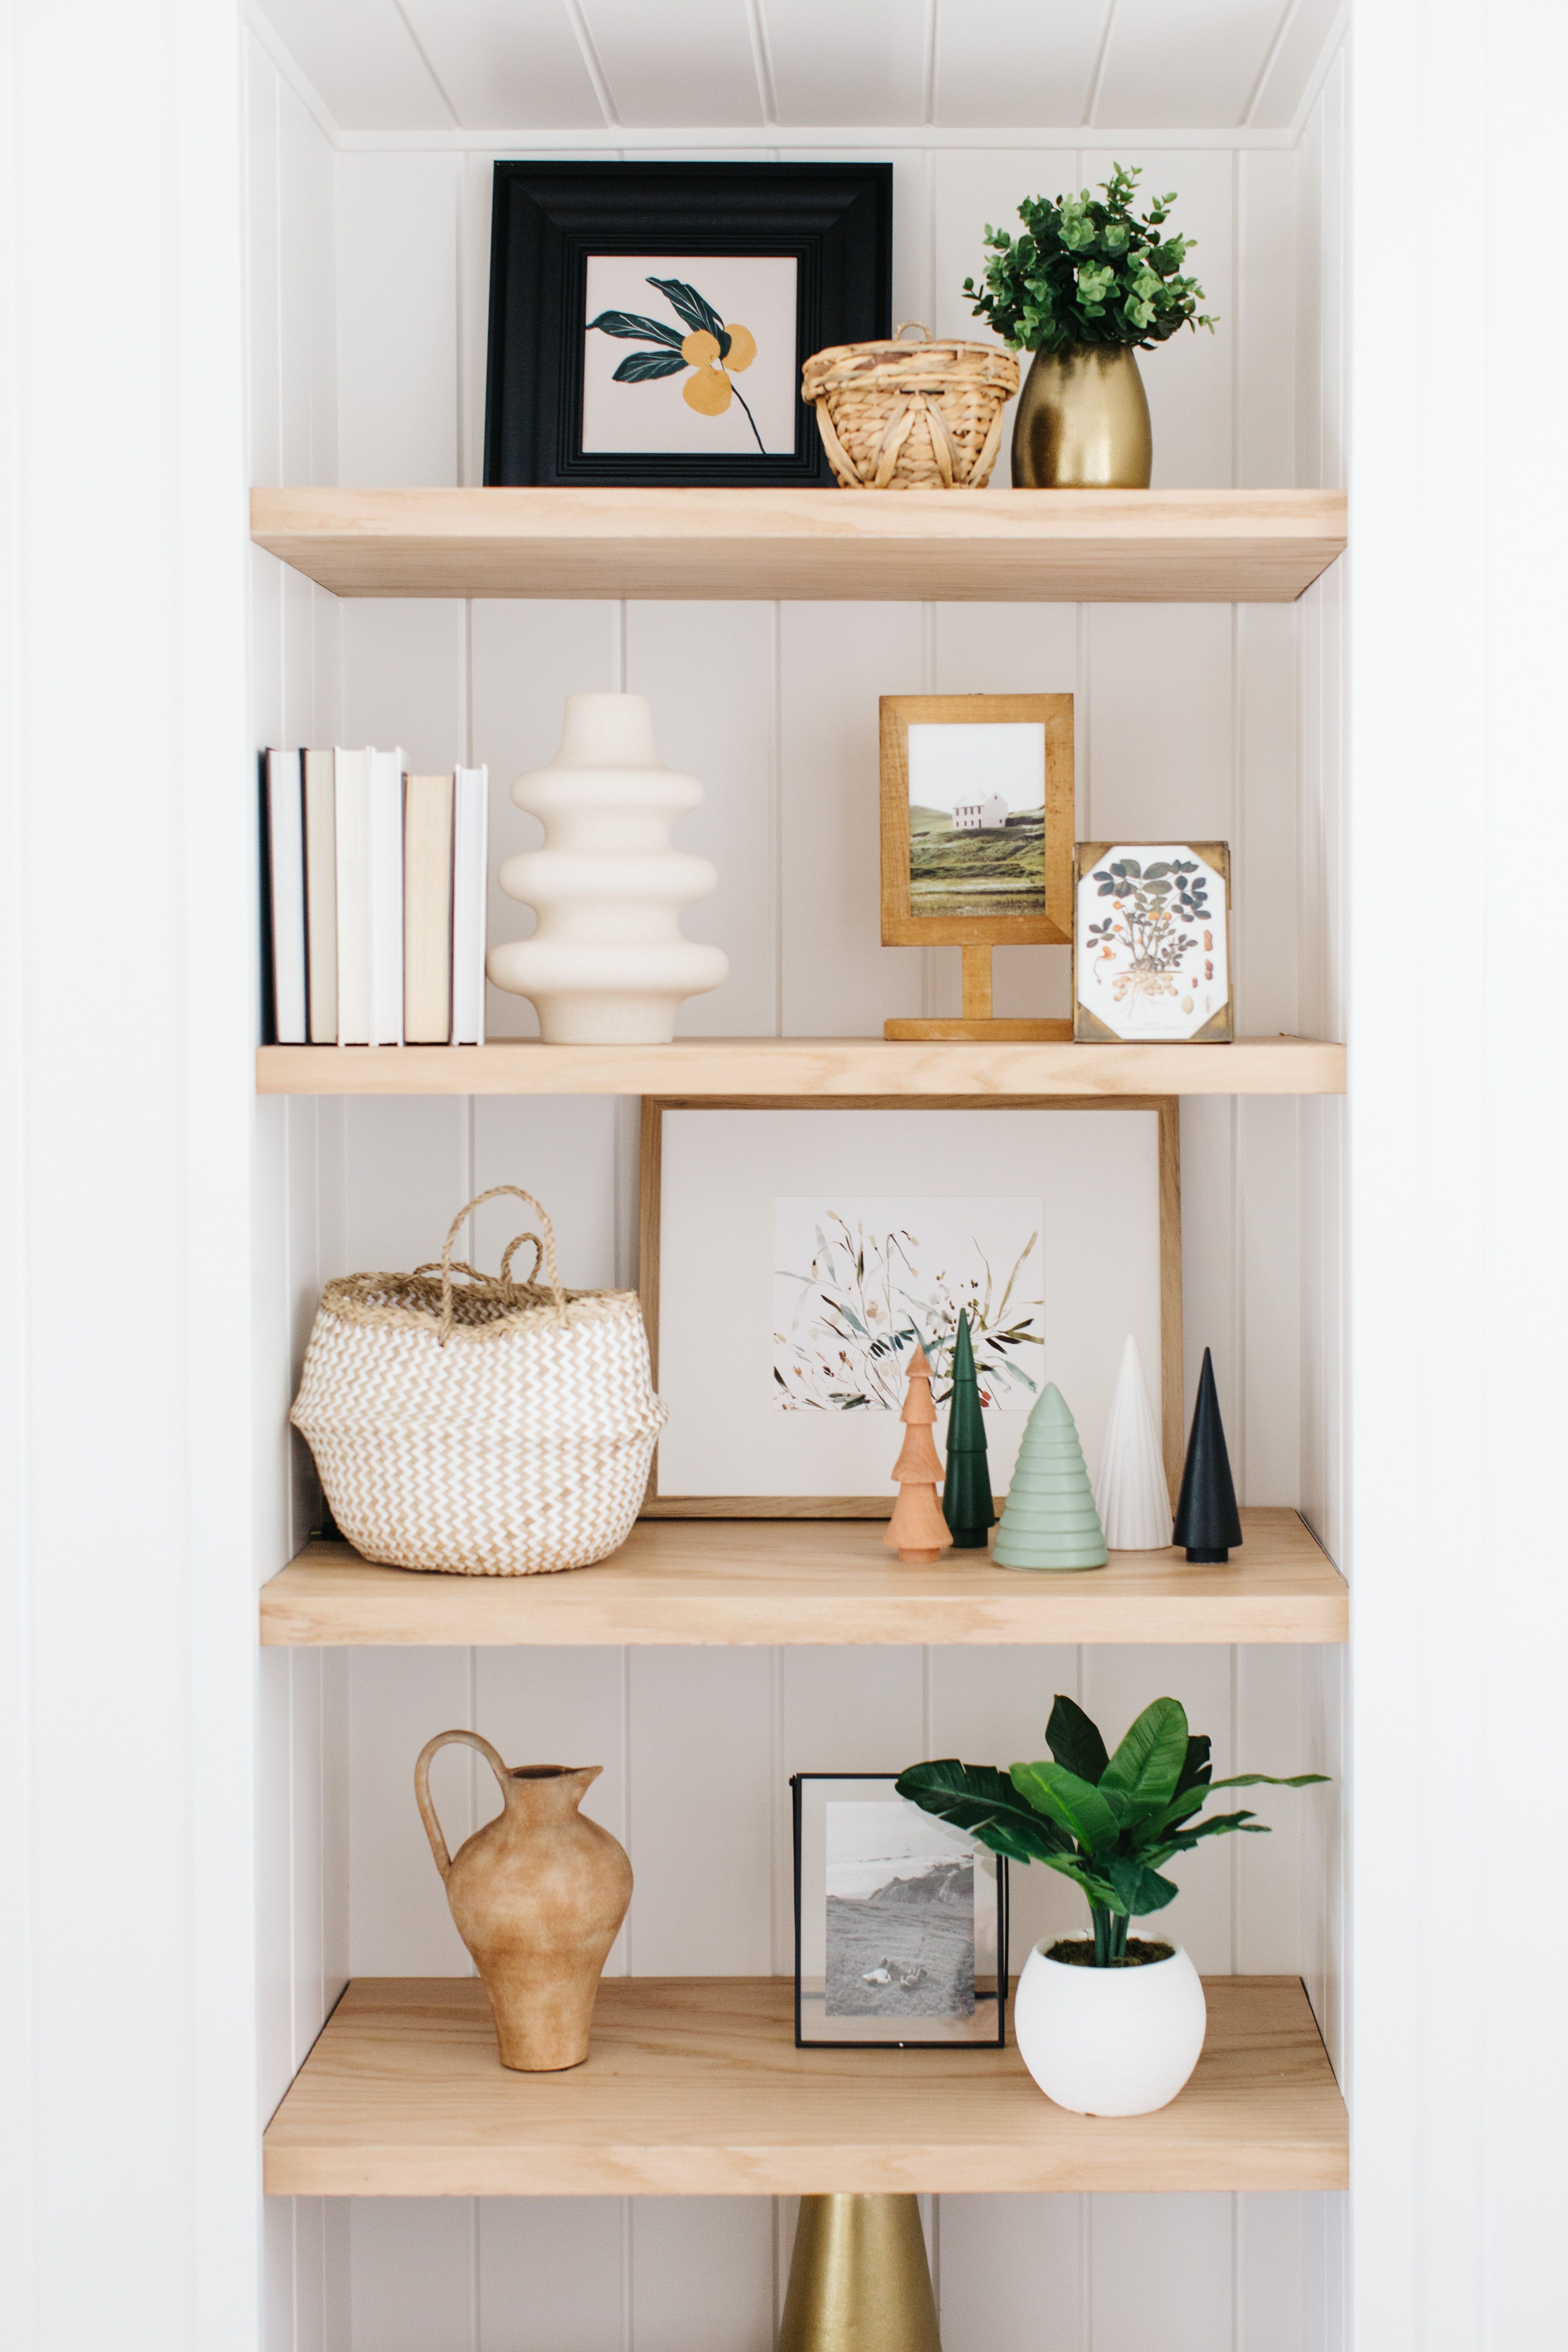 Unique Ways To Display Art - Our Favorite Frames & Easels - Jenny Komenda